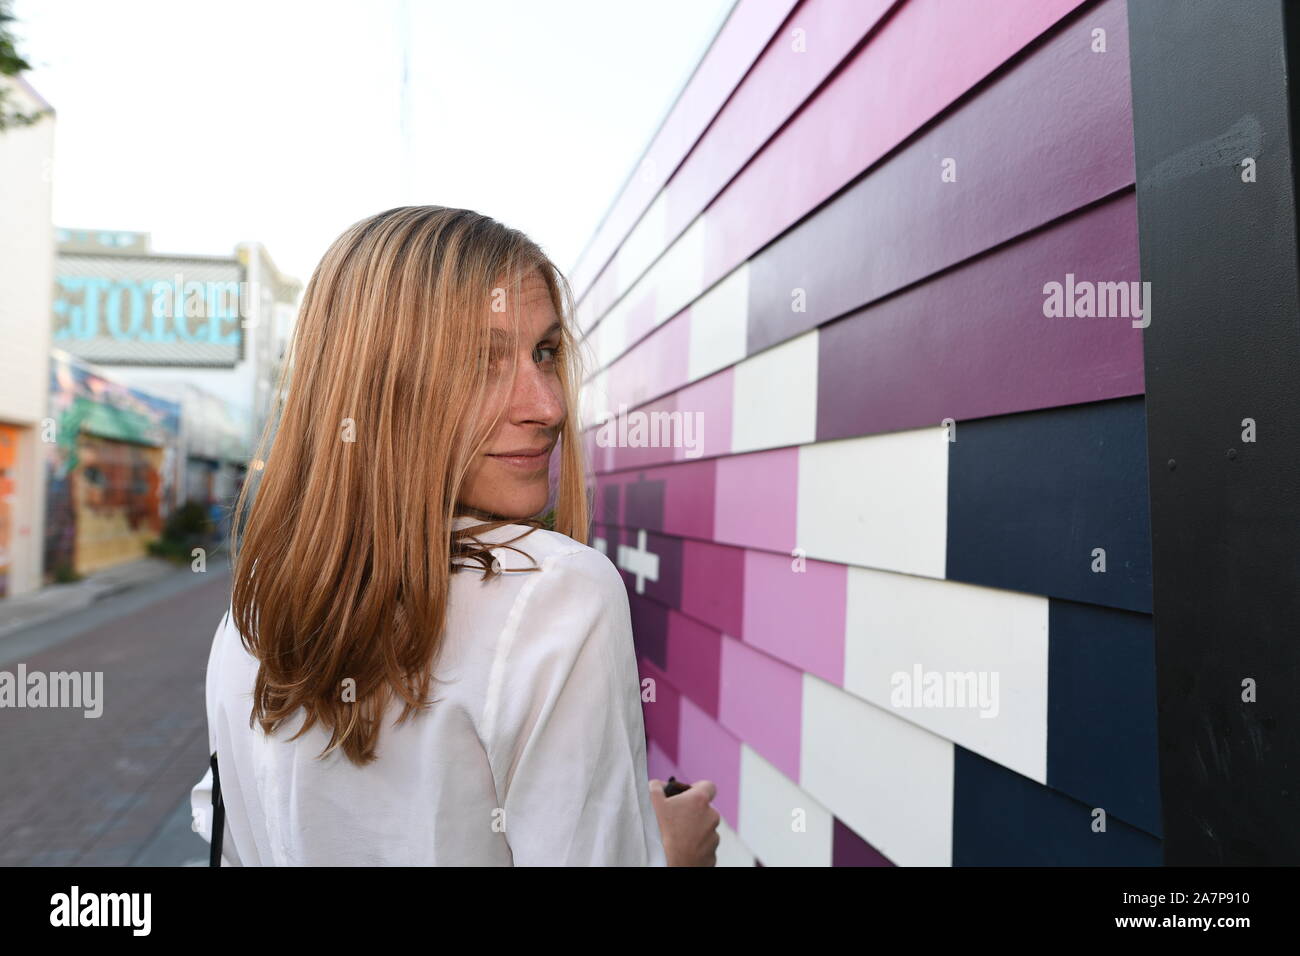 young blonde woman looking over her shoulder wearing a white shirt, walking past large purple painted design on wall siding in an urban alley Stock Photo